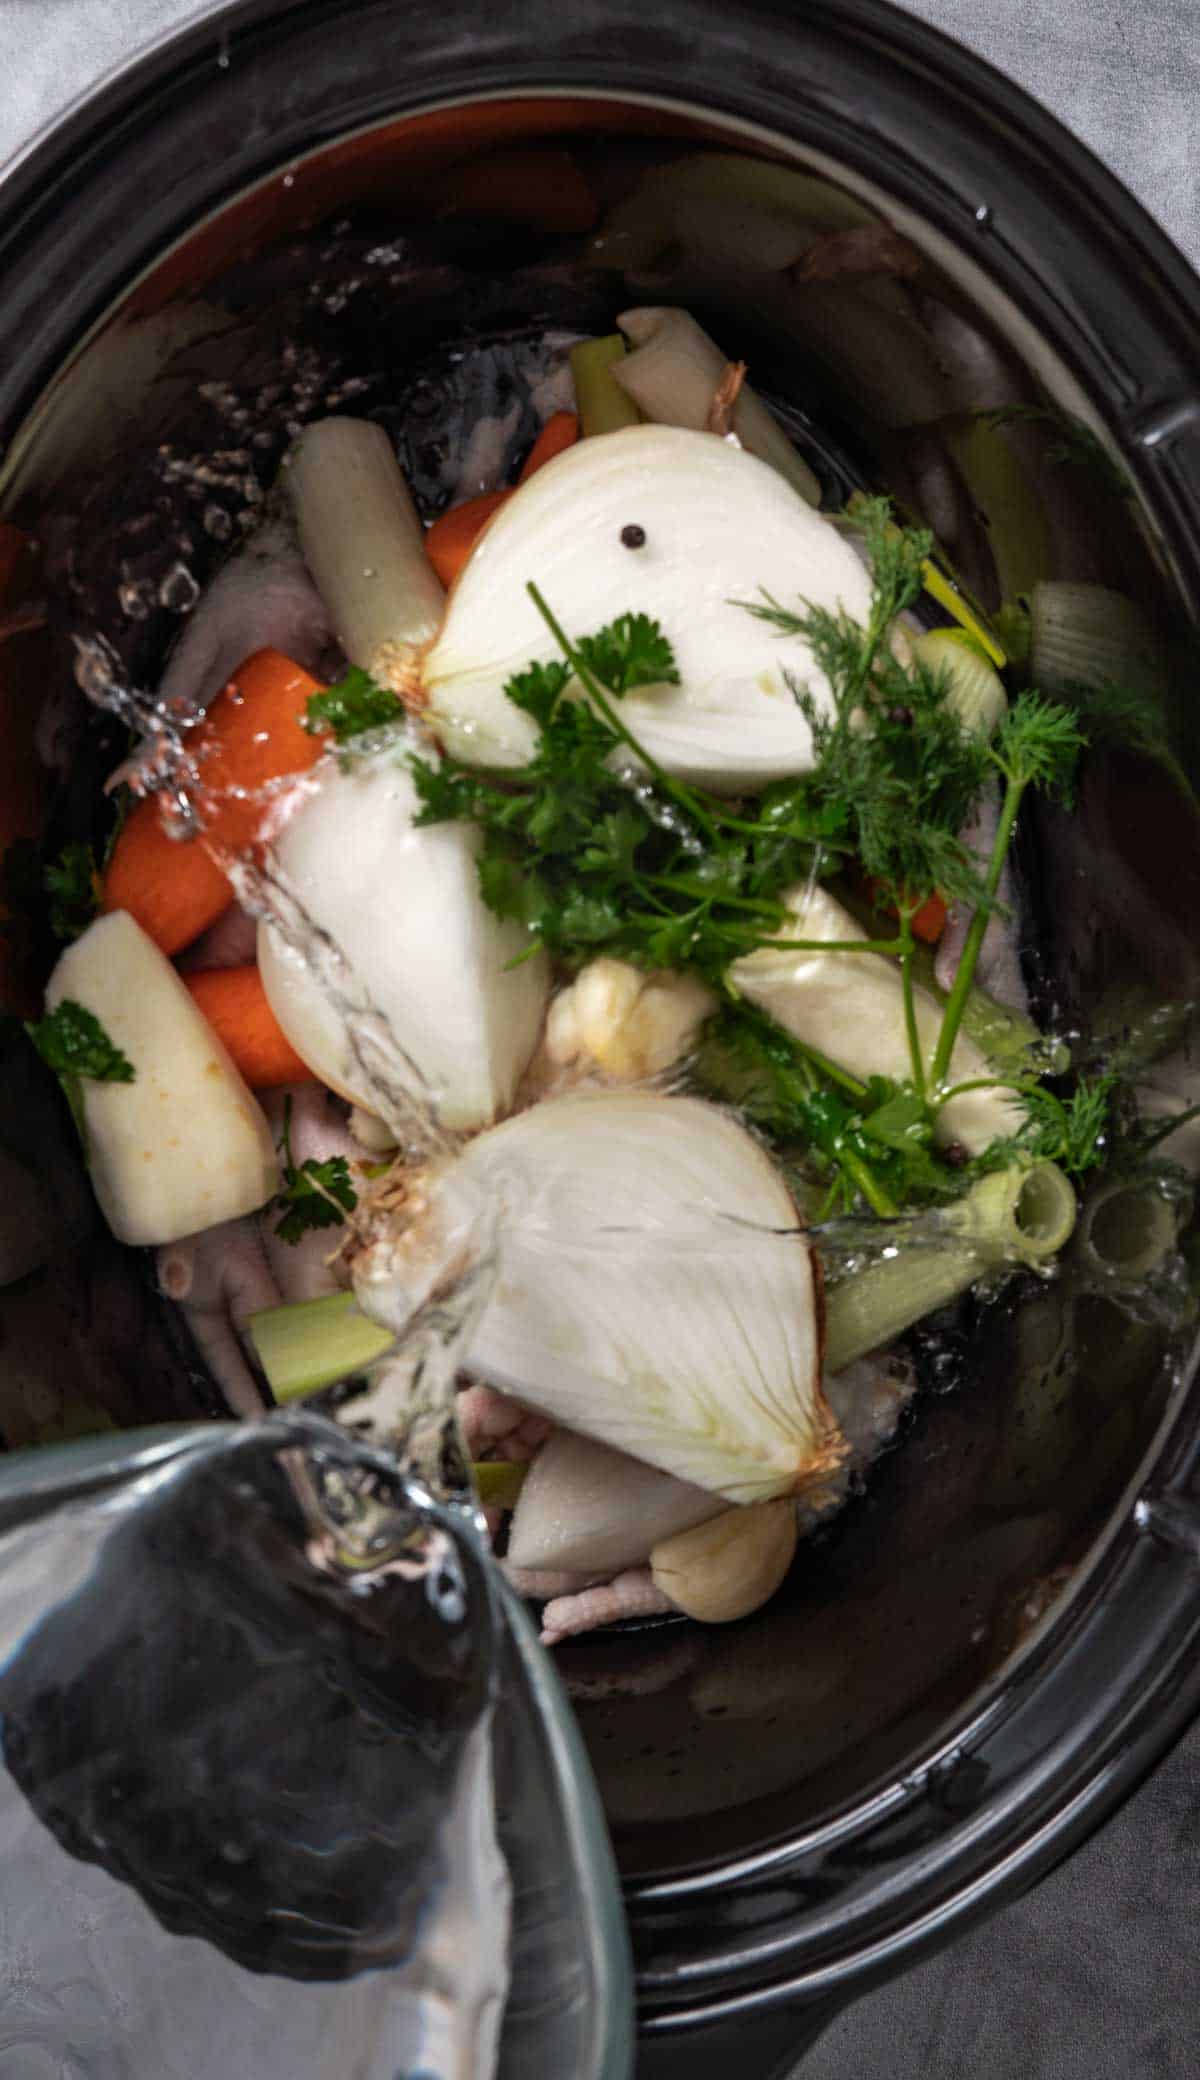 Filling a crock pot with liquid over chicken parts and veggies.